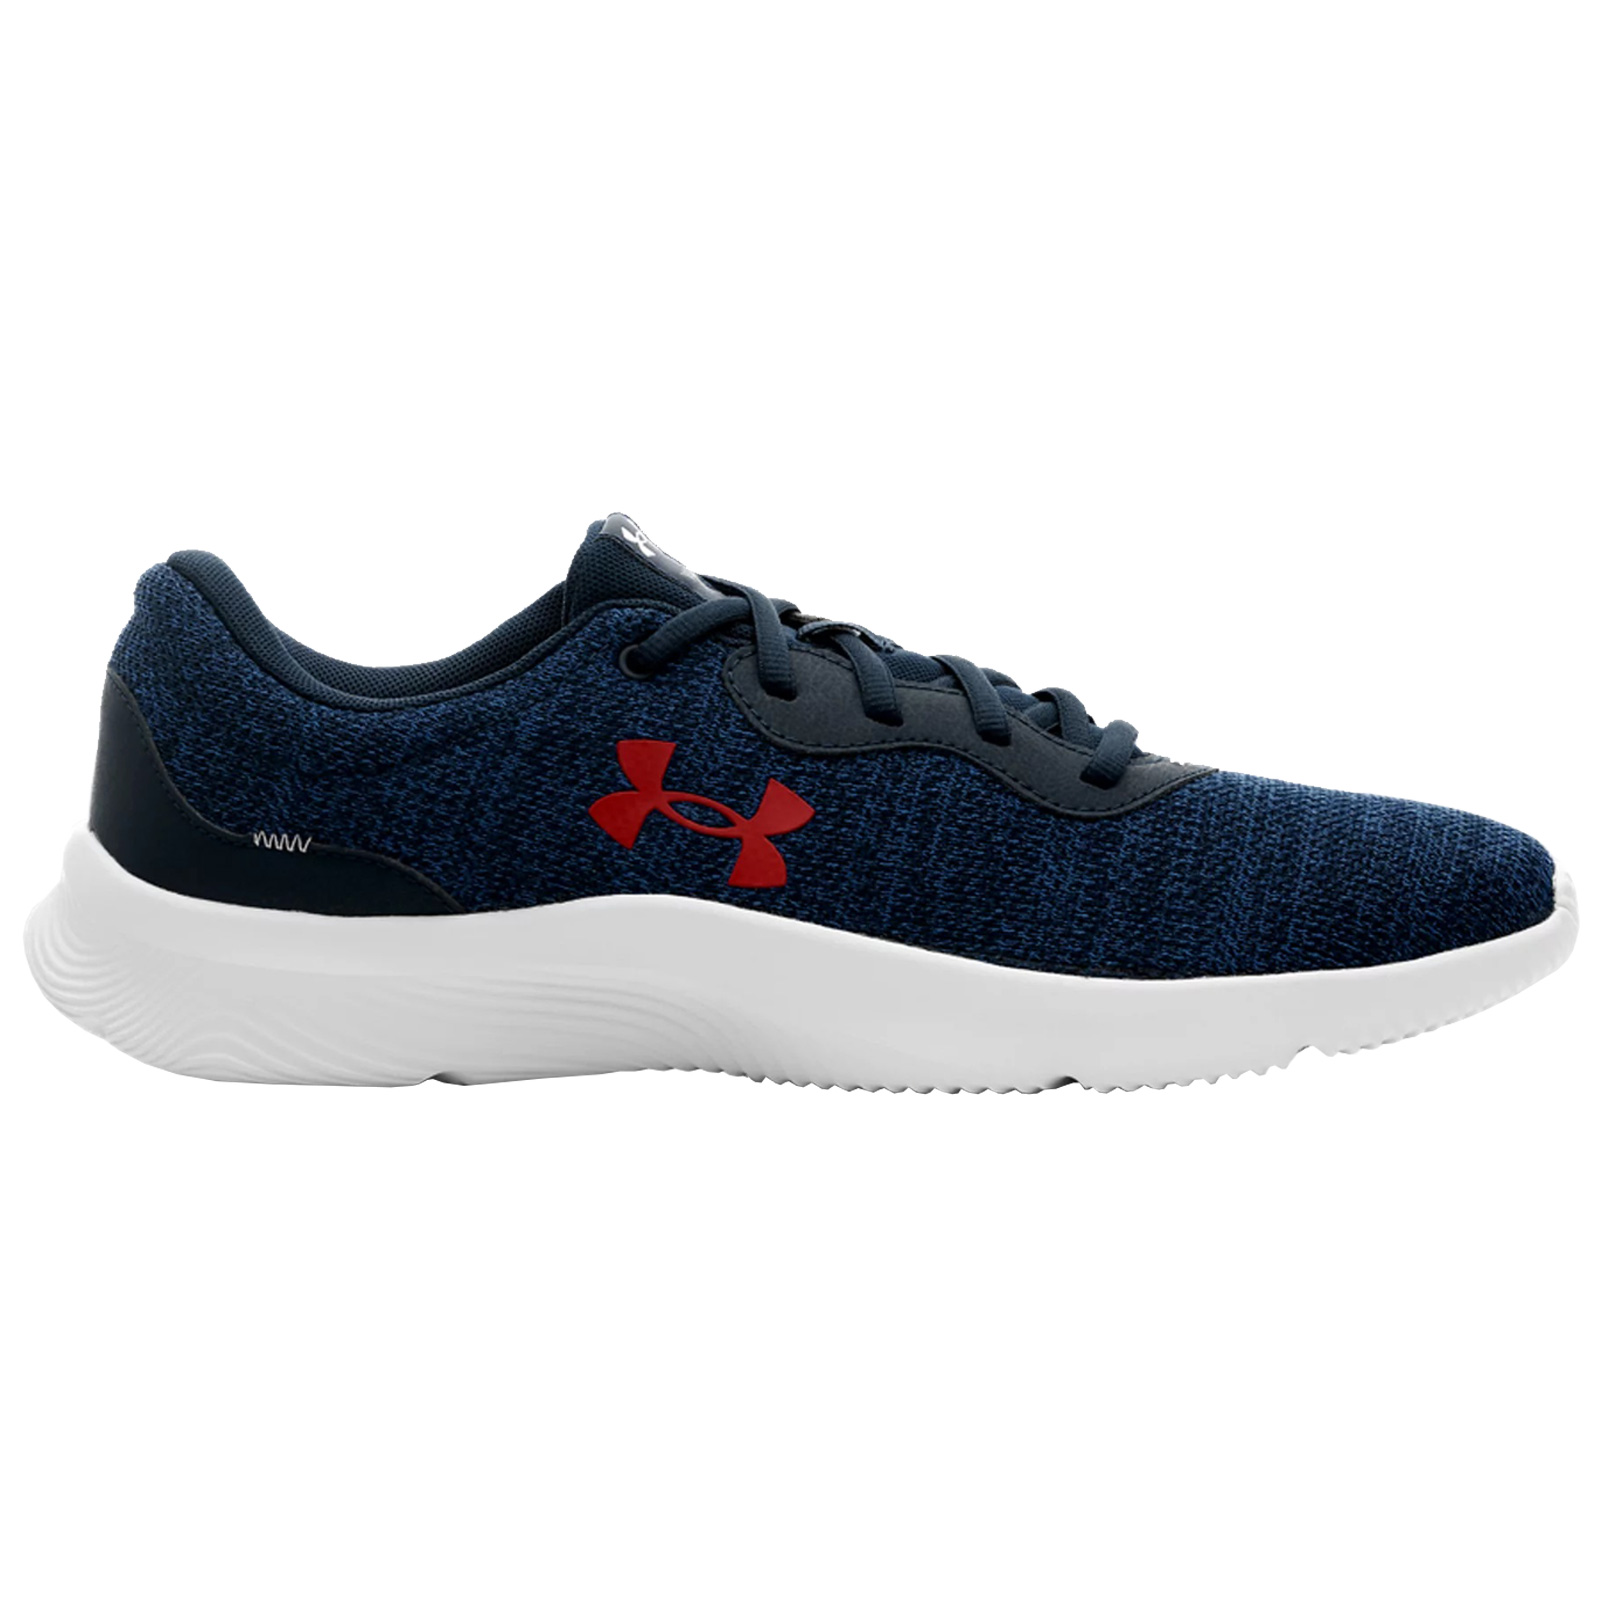 2021 Under Armour Mens Mojo 2 Sportstyle Trainers UA Gym Running Shoes ...